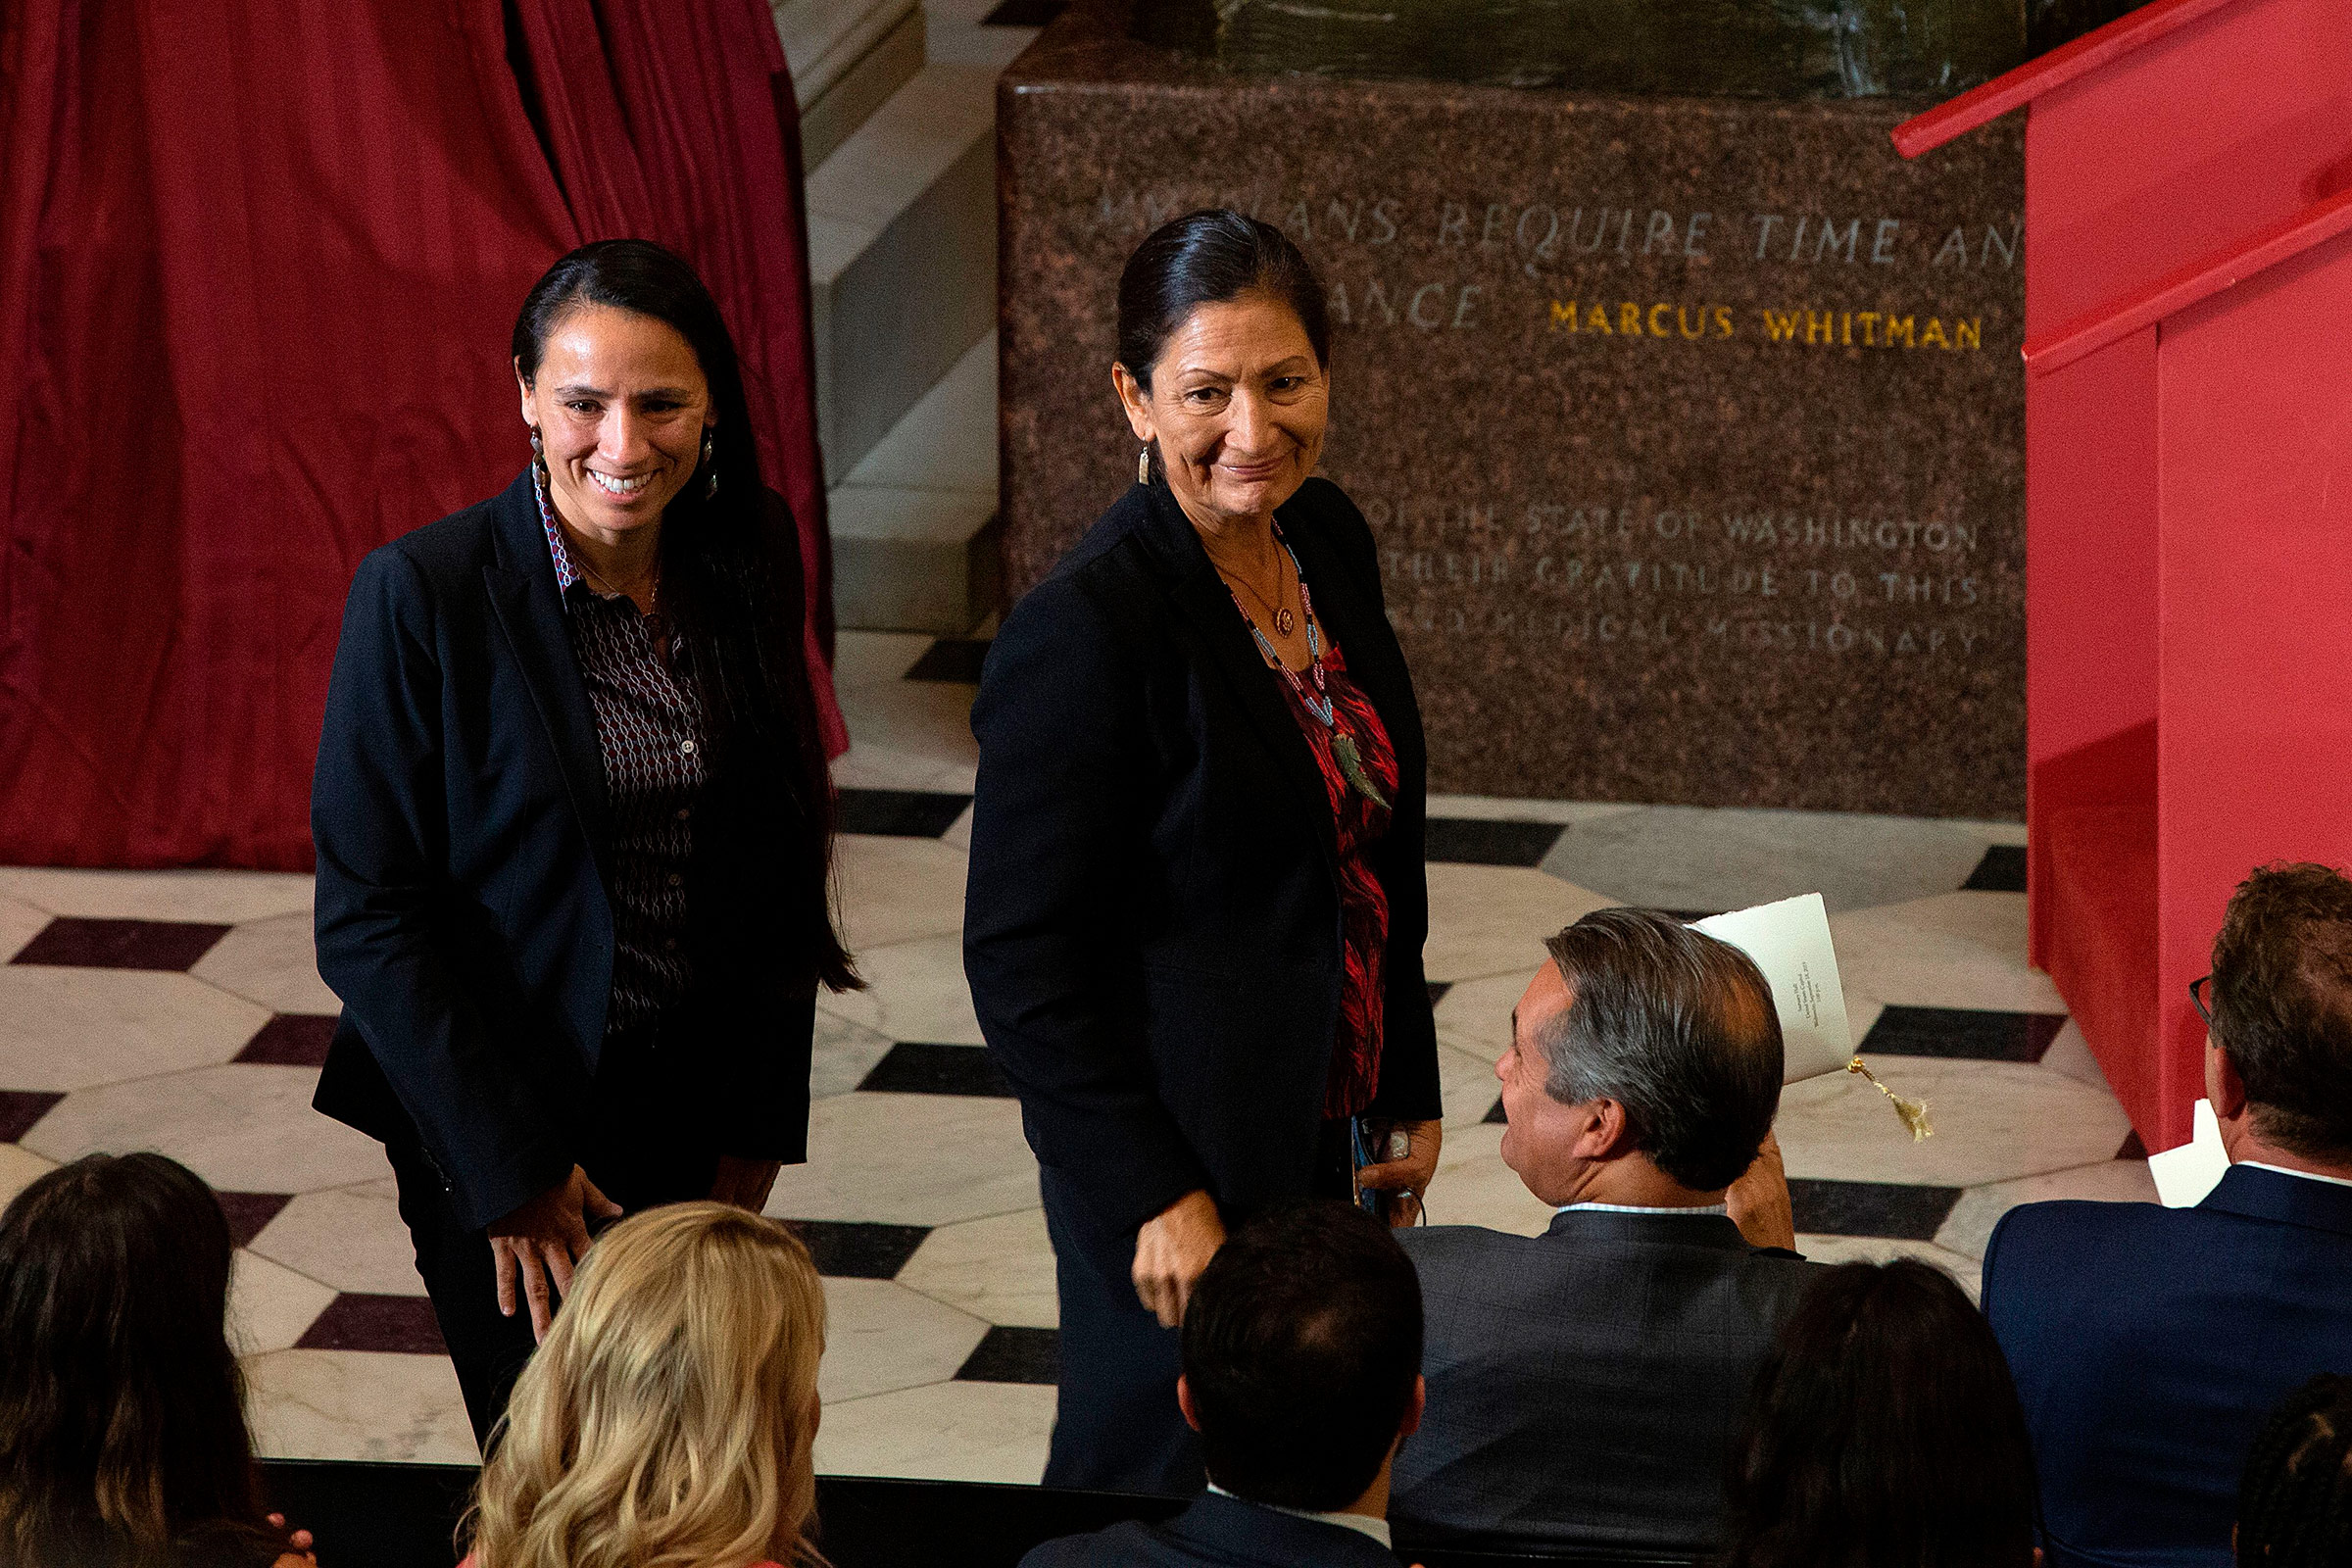 U.S. Representatives Sharice Davids, left, and Deb Haaland are recognized as the first Native American women elected to Congress during a dedication and unveiling ceremony for a statue of Ponca Chief Standing Bear of Nebraska on Capitol Hill in Washington, DC, on Sept. 18, 2019. (Alastair Pike— AFP/Getty Images)